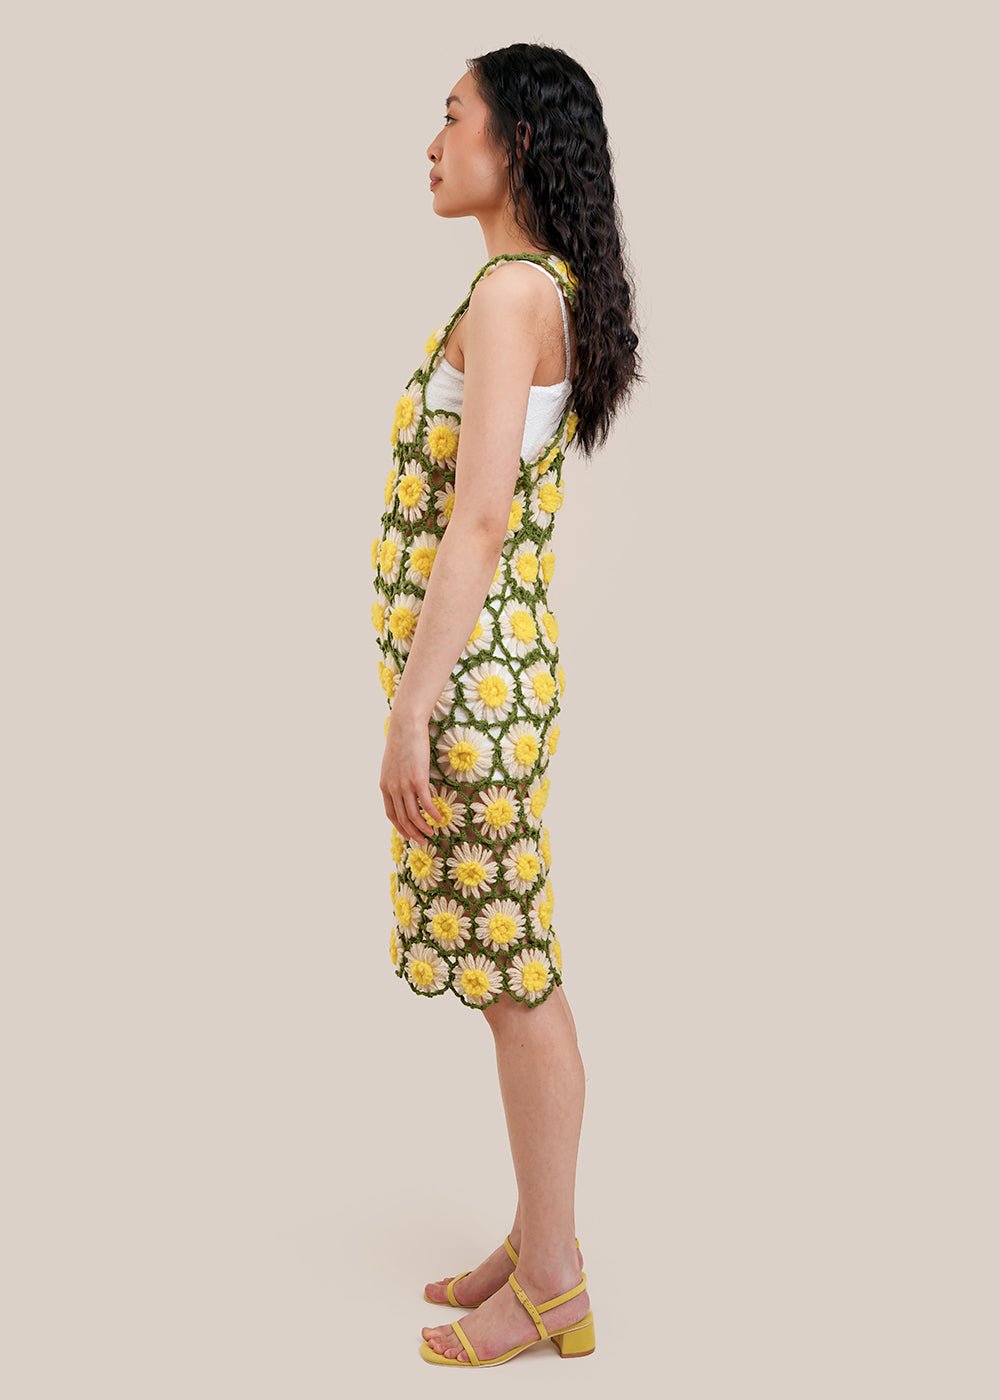 THE SERIES Daisy Dress - New Classics Studios Sustainable Ethical Fashion Canada